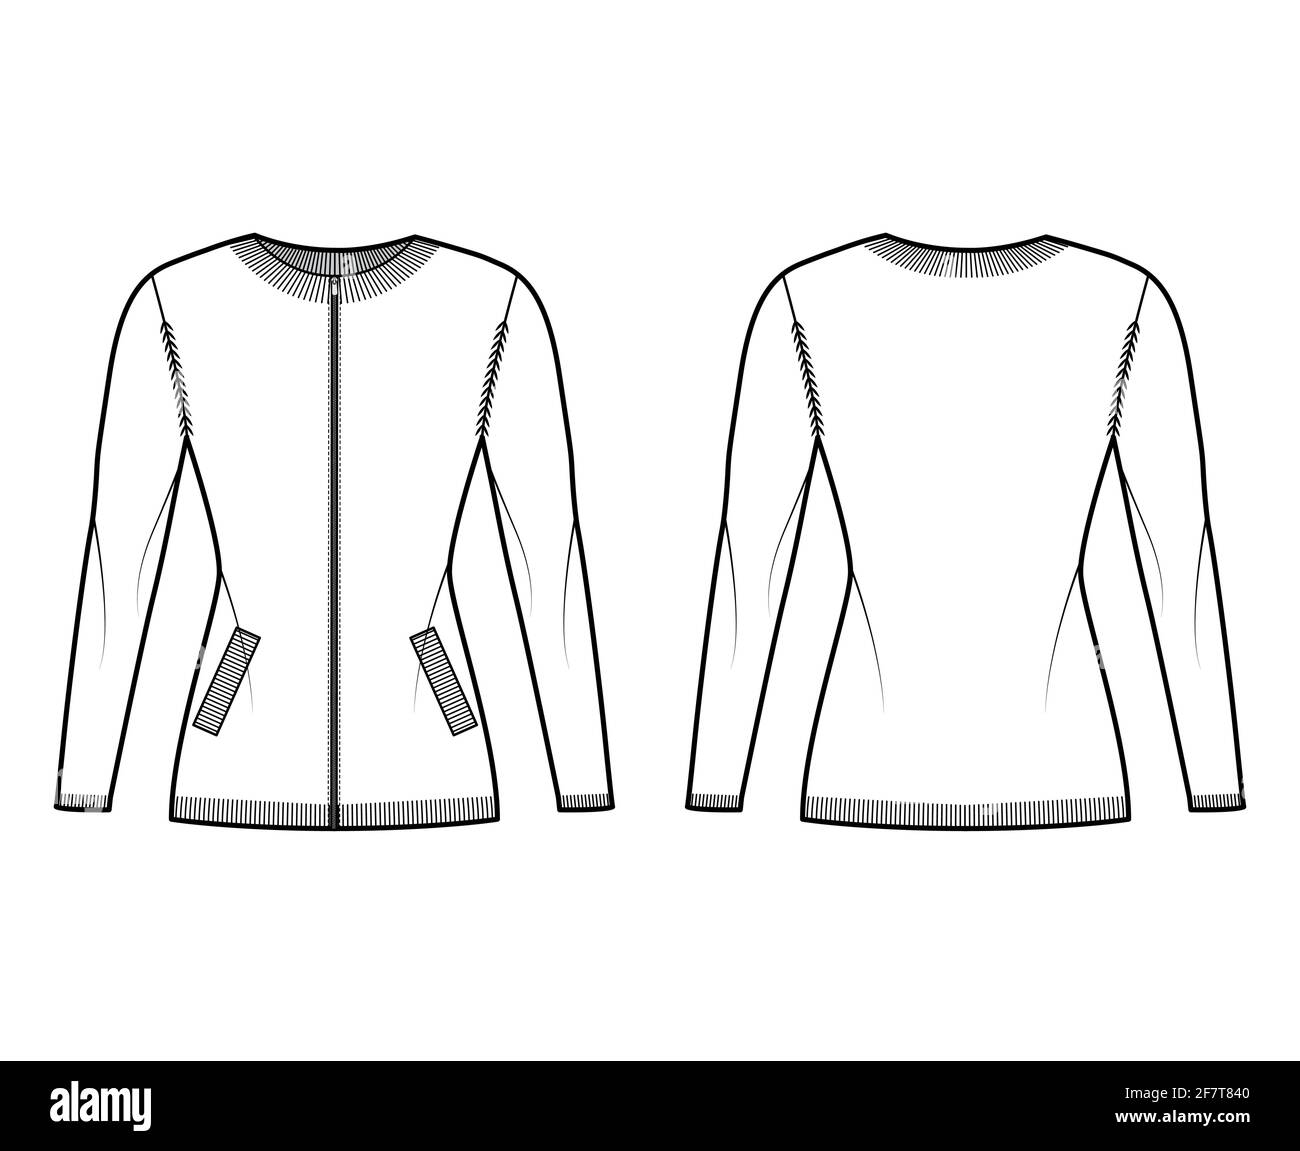 Zip-up cardigan Sweater technical fashion illustration with rib crew neck, long sleeves, fitted body, knit trim, pockets. Flat jumper apparel front, back, white color. Women, men unisex CAD mockup Stock Vector